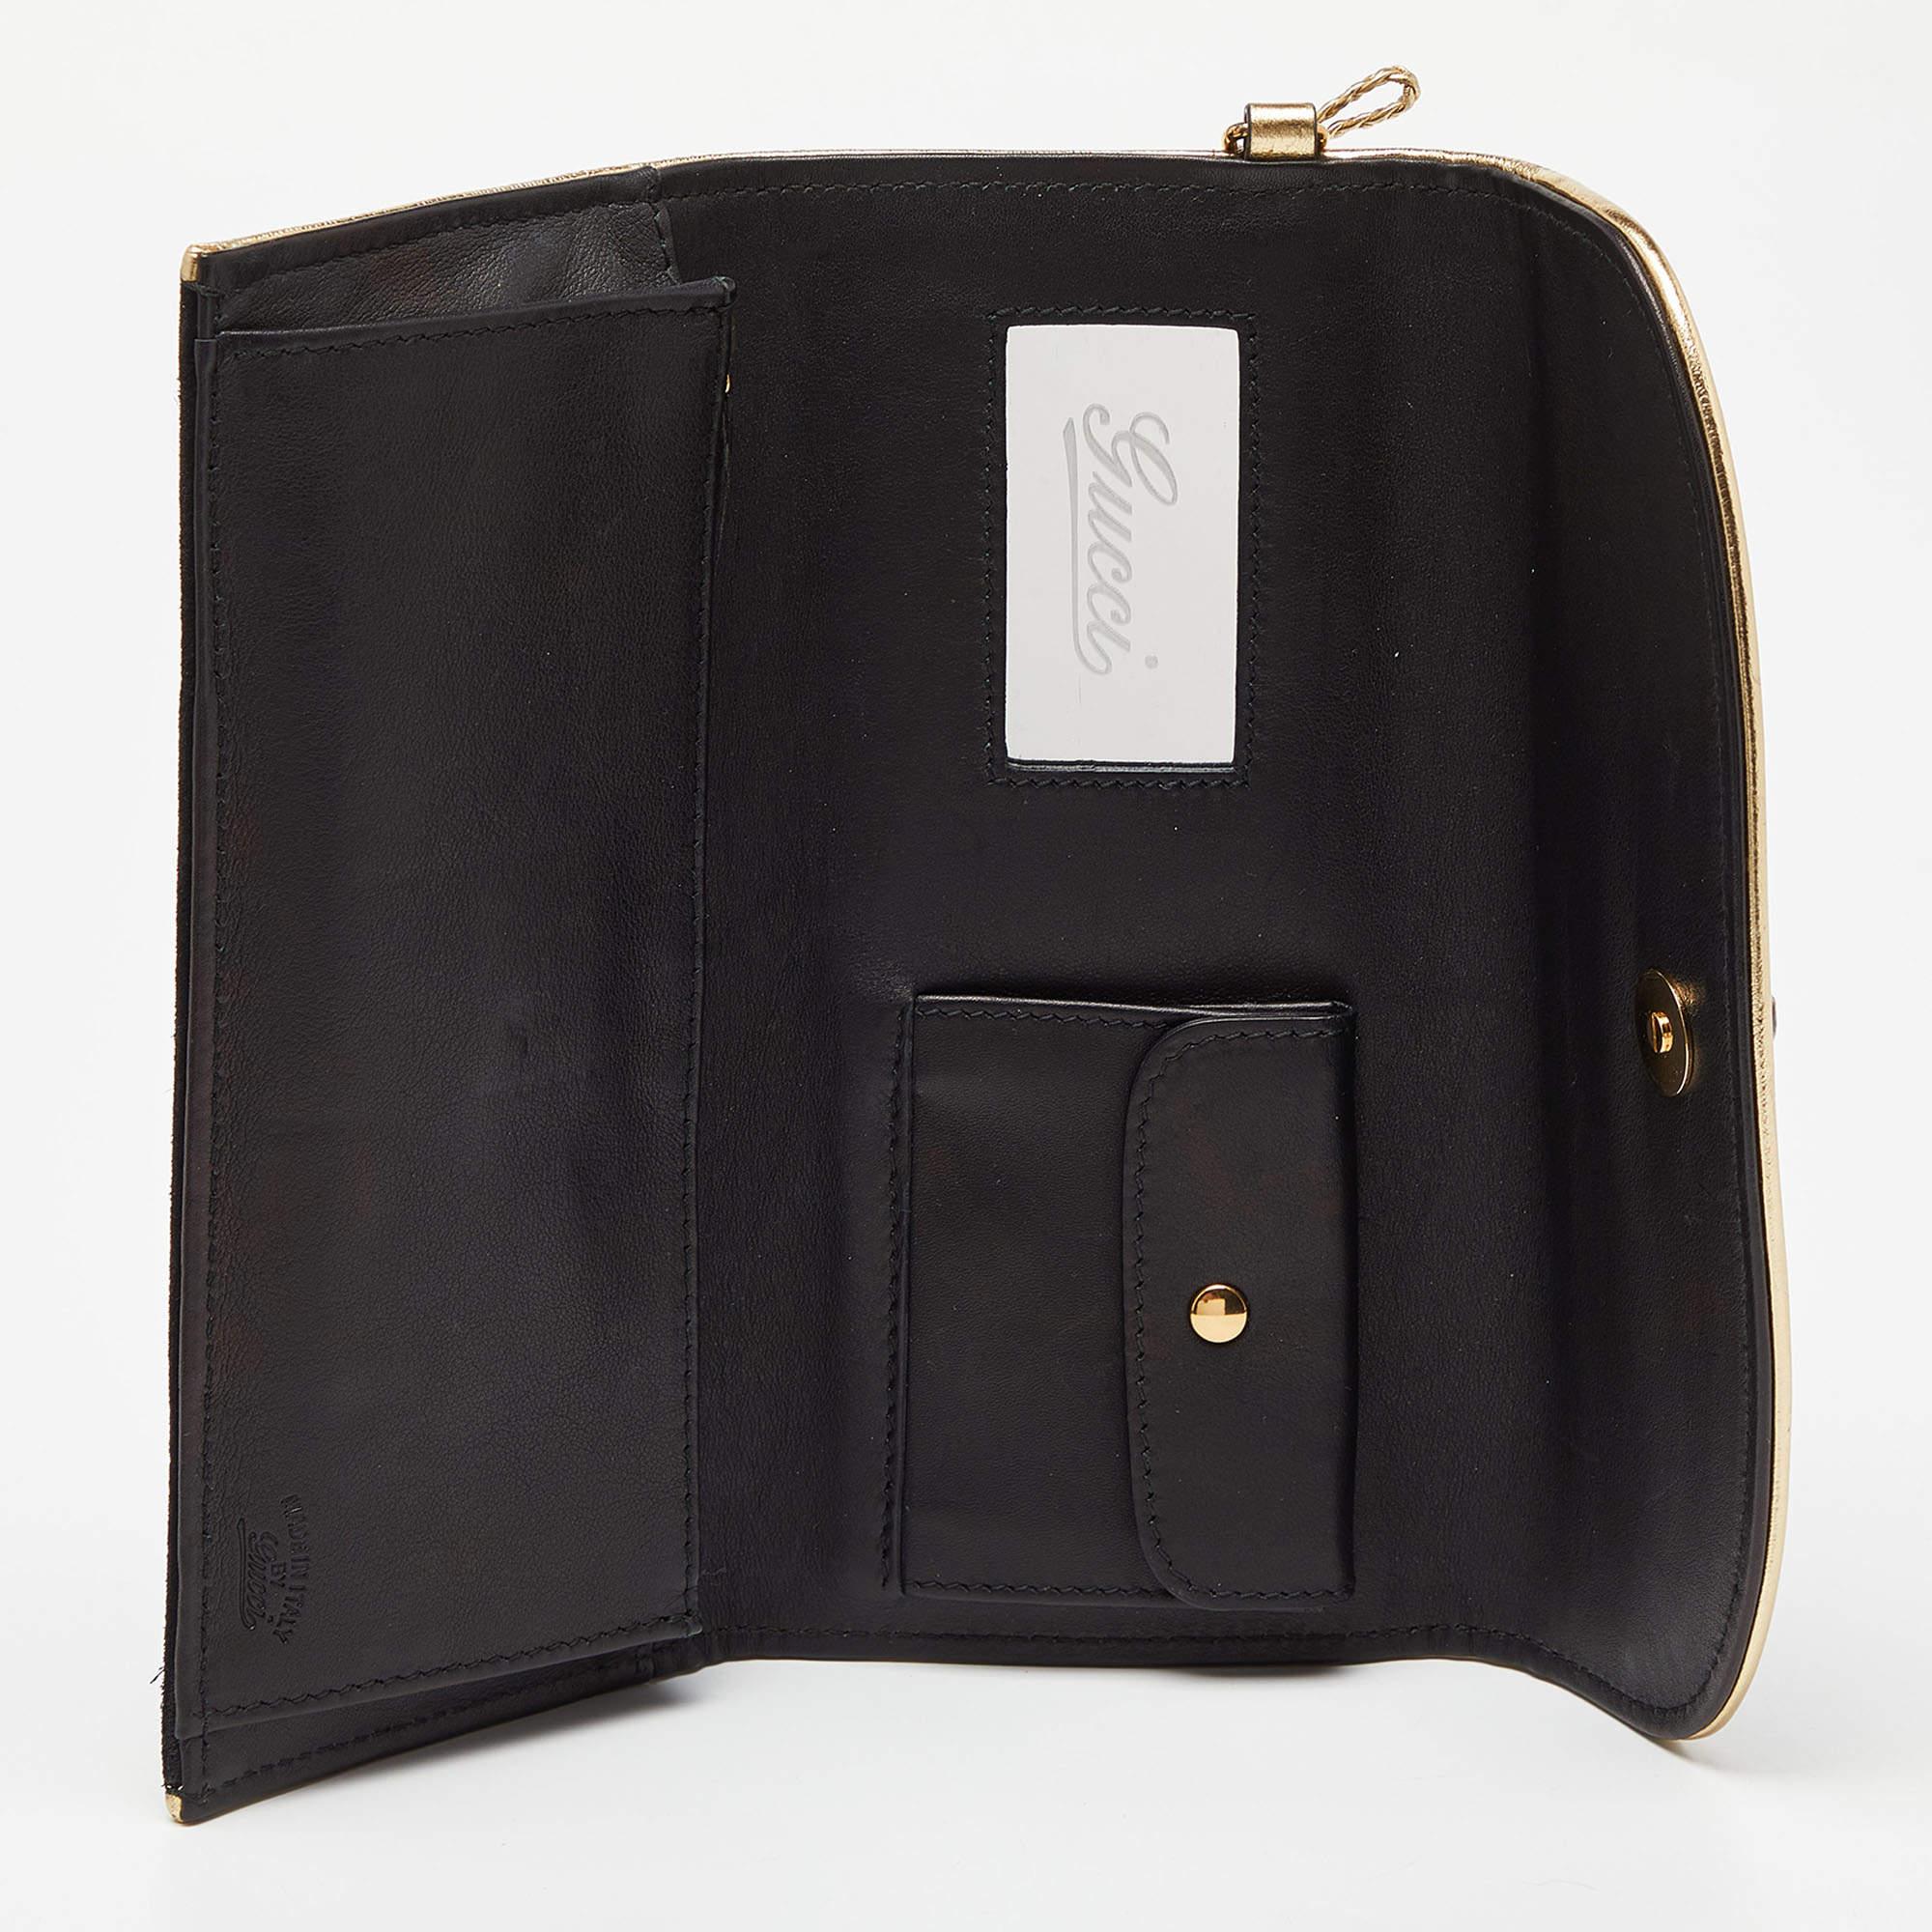 Gucci Black/Gold Suede Bamboo Wristlet Clutch For Sale 3